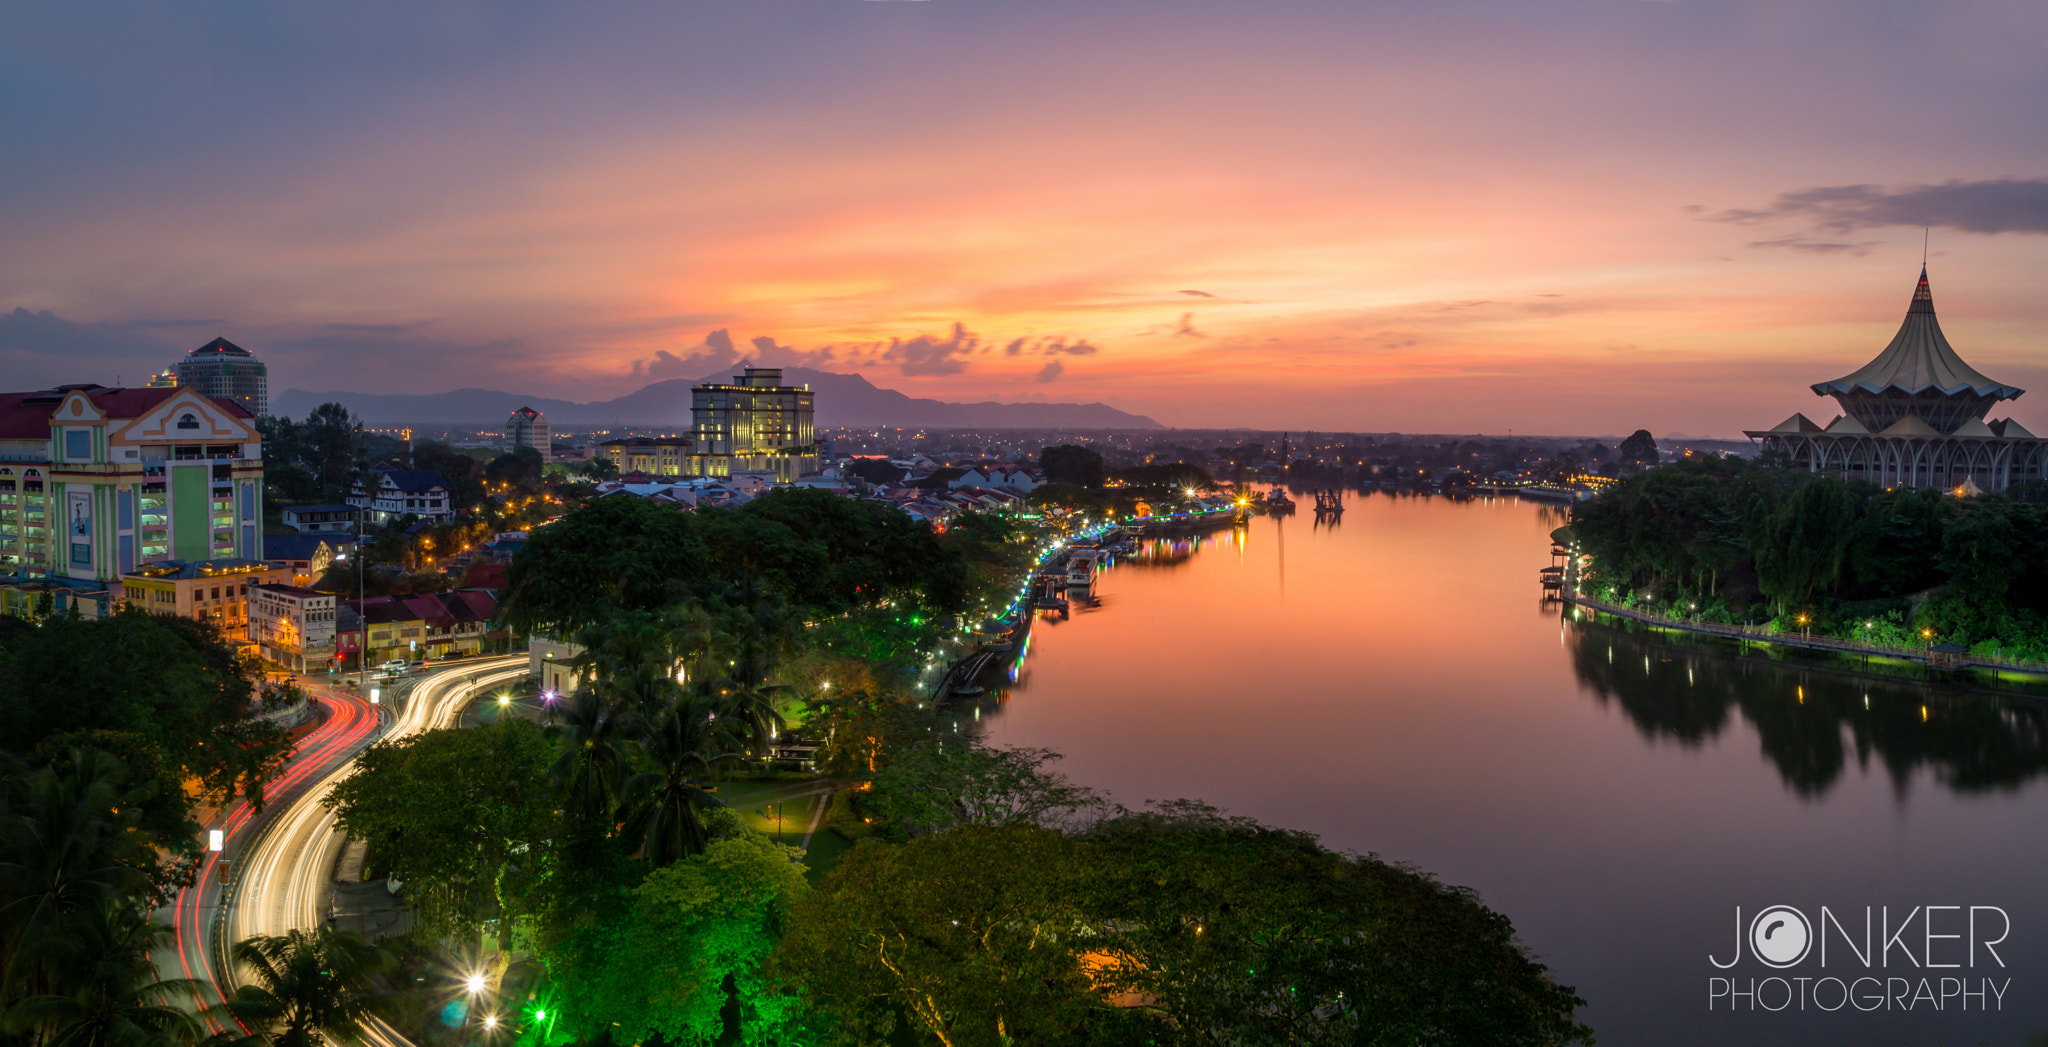 Sony SLT-A58 + Tamron 18-270mm F3.5-6.3 Di II PZD sample photo. 'sunset in kuching' photography